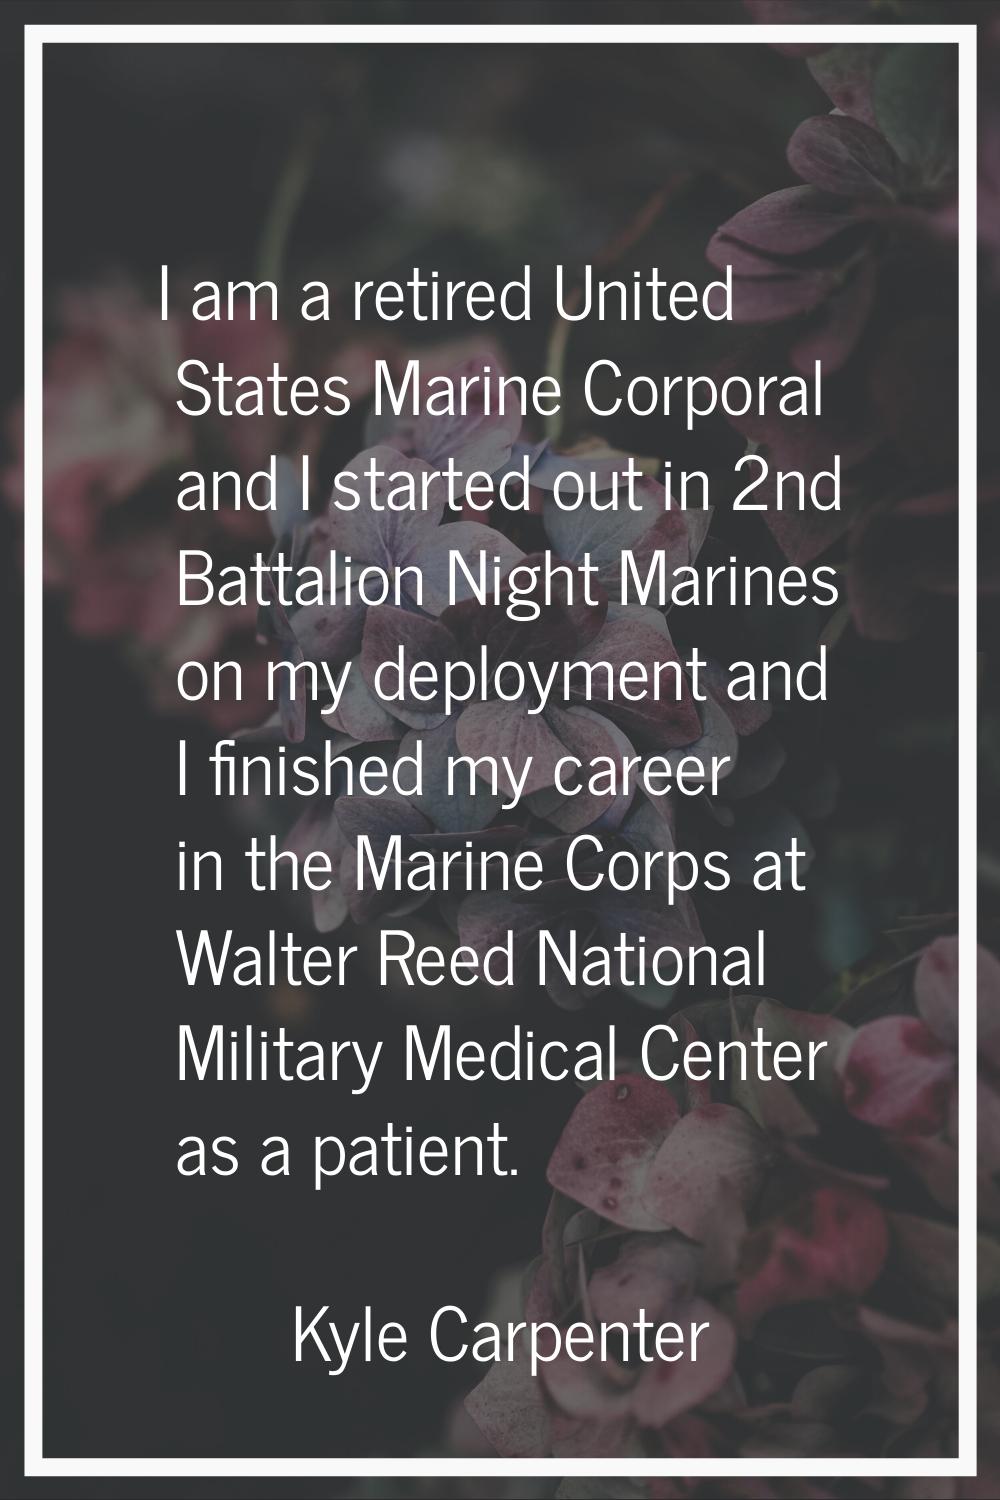 I am a retired United States Marine Corporal and I started out in 2nd Battalion Night Marines on my